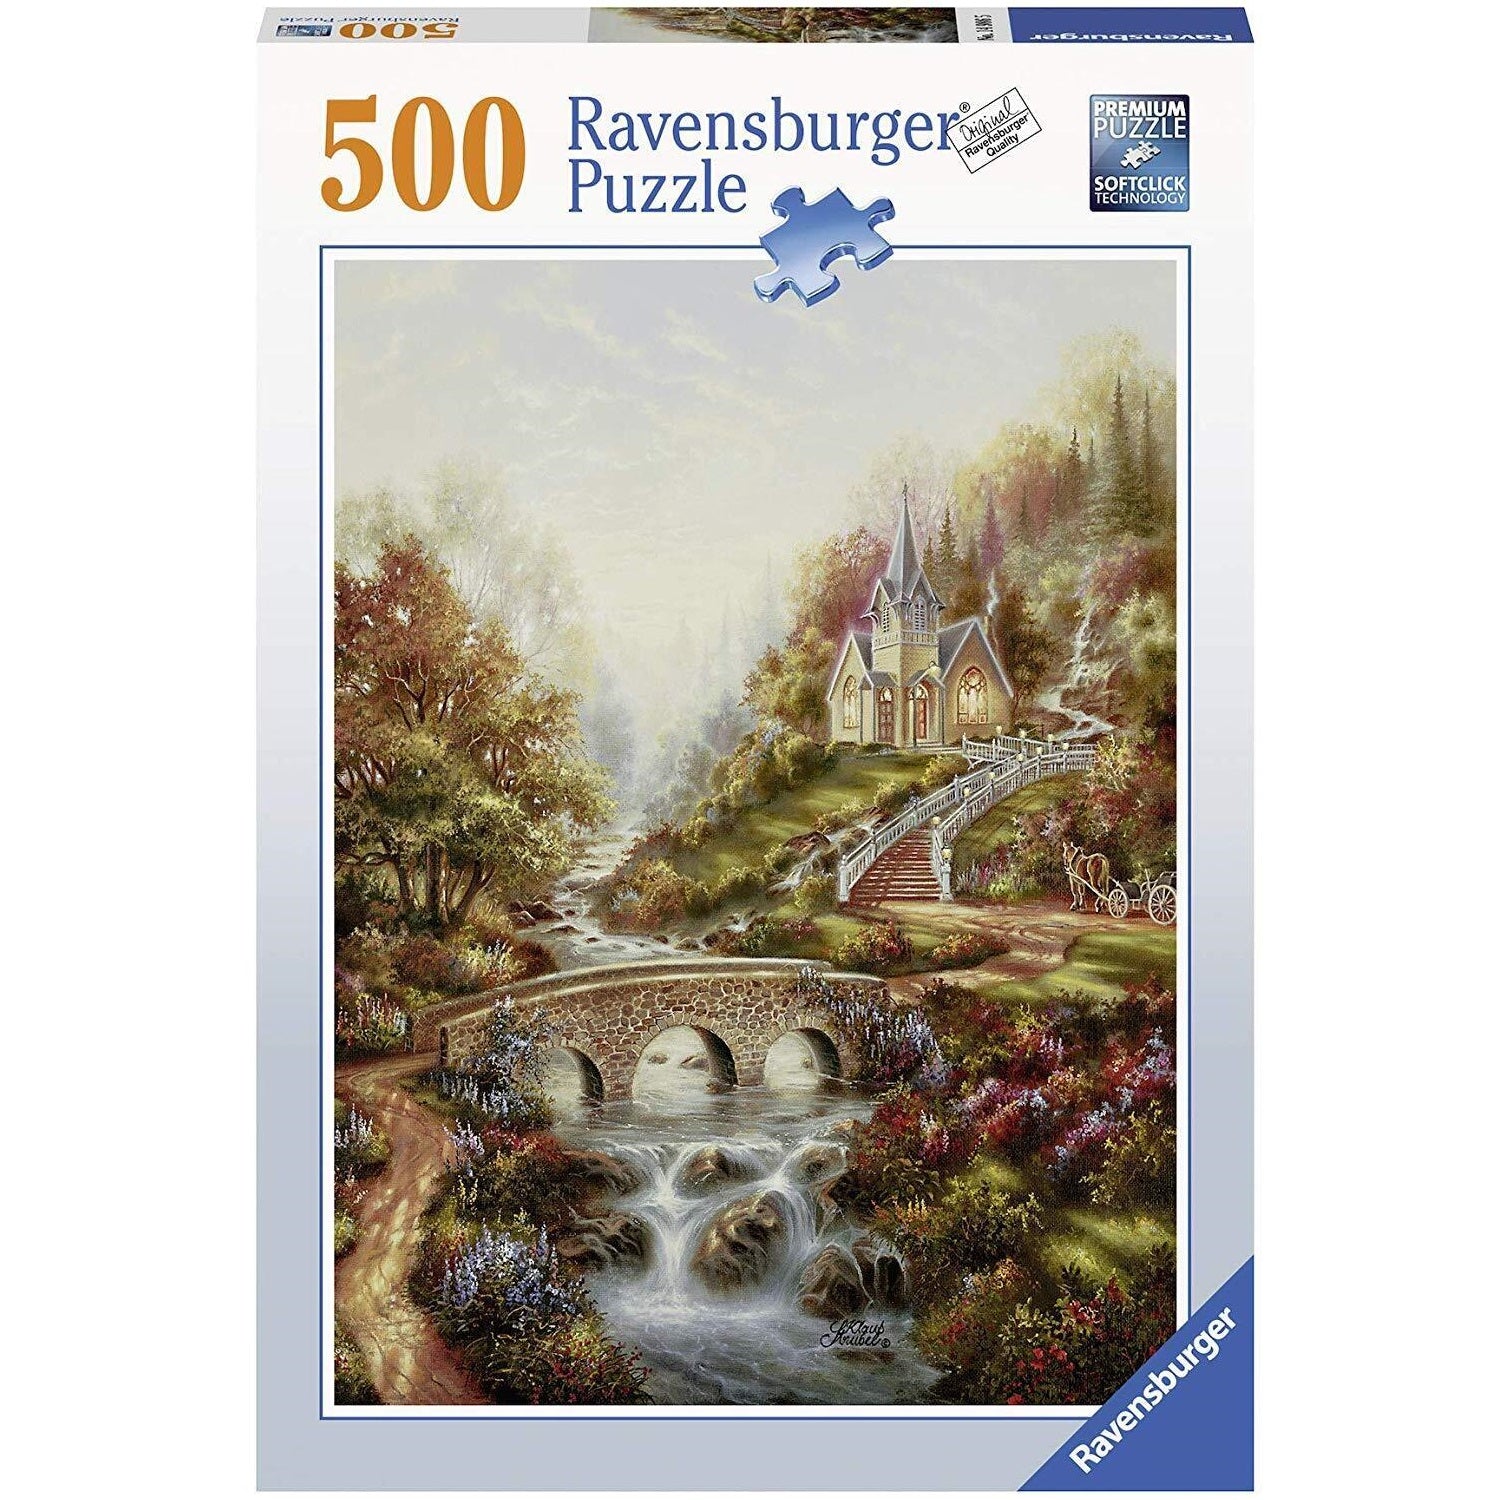 The Golden Hour 500pc